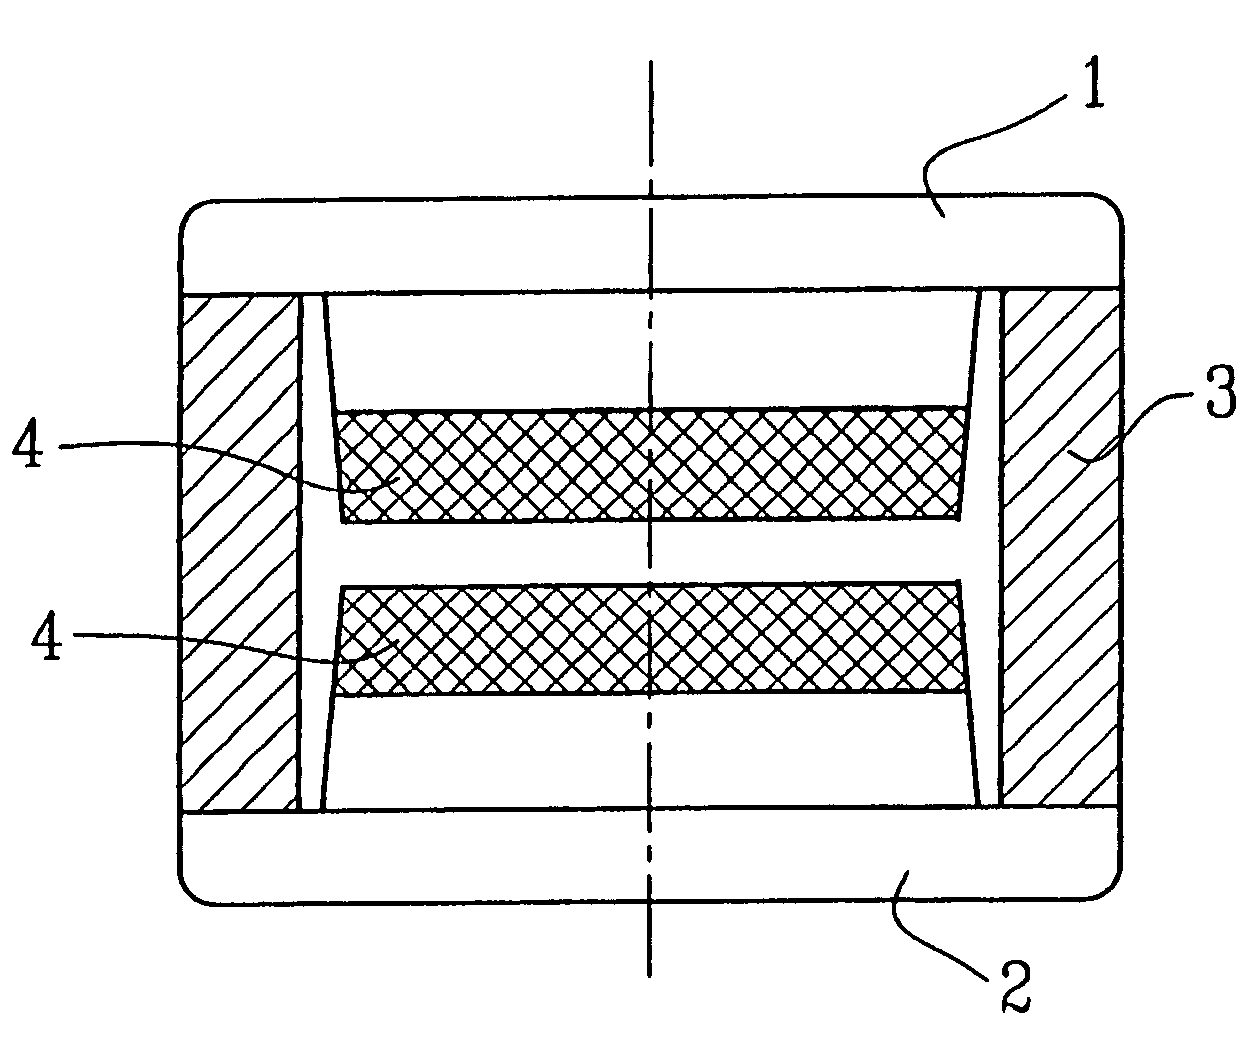 Gas discharge tube having electrodes with chemically inert surface